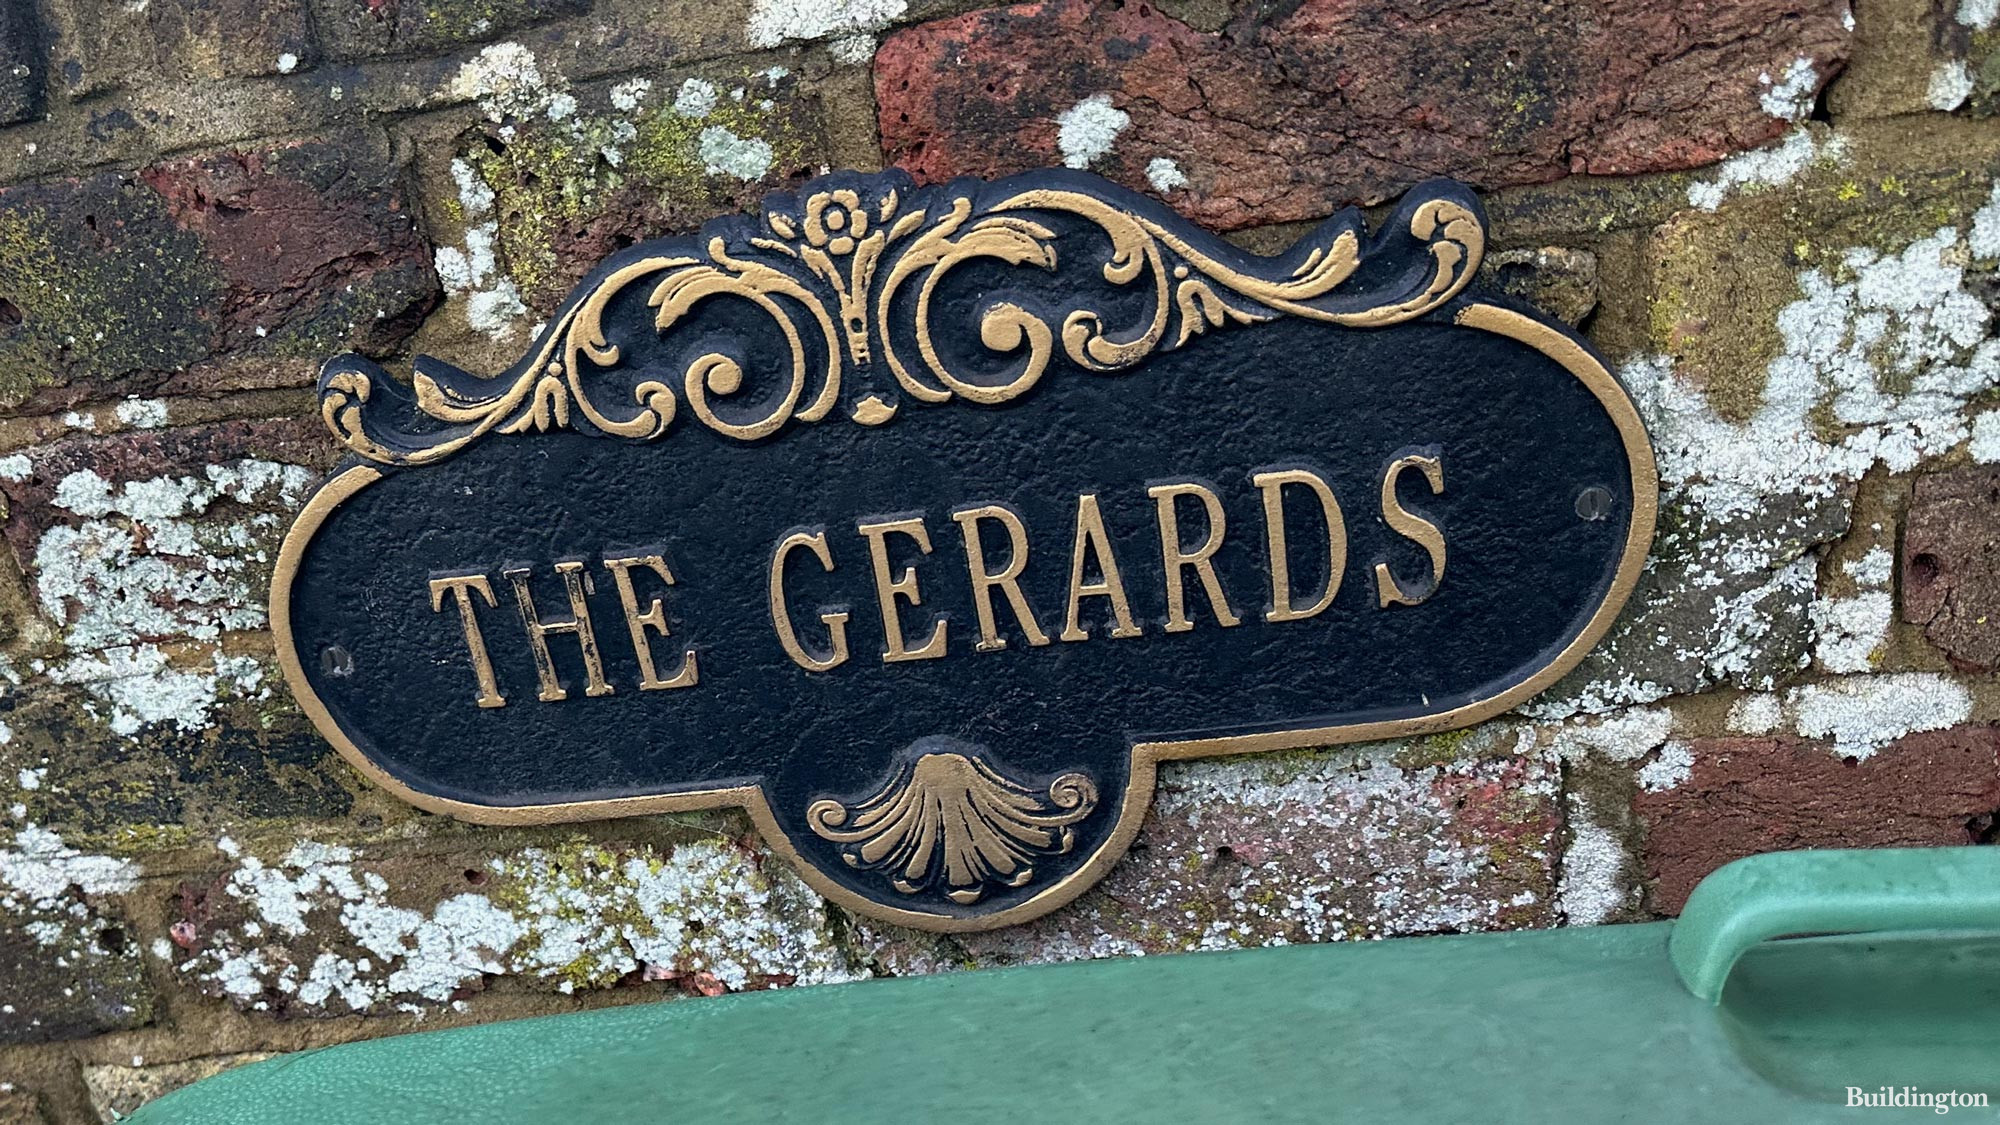 The Gerards signage on the gate in Harrow on the Hill, Harrow HA1